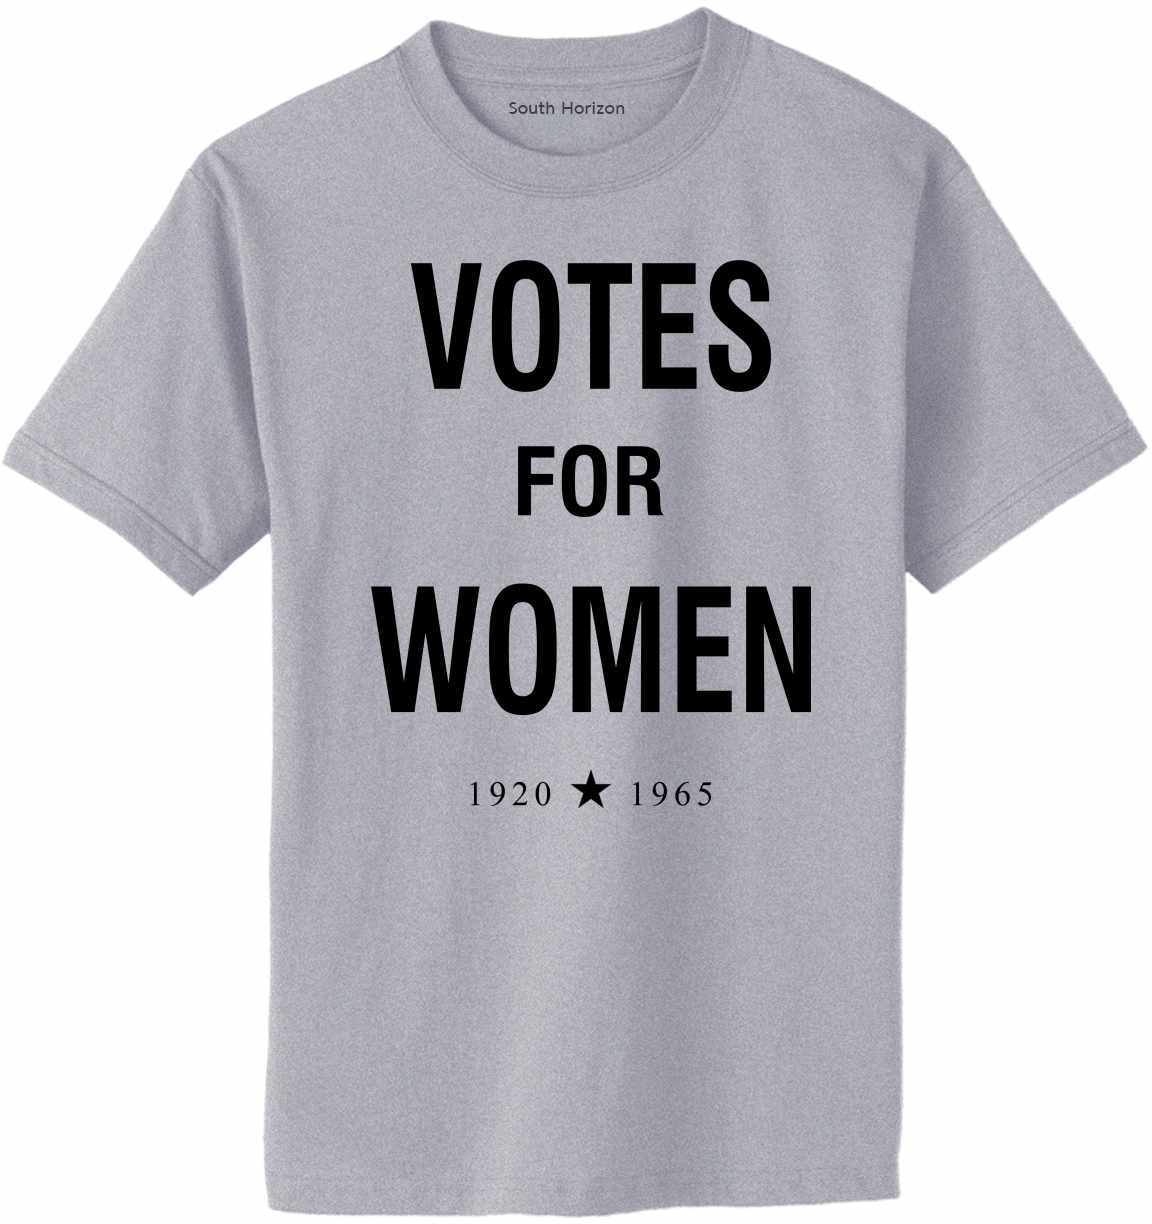 Votes For Women Adult T-Shirt (#994-1)